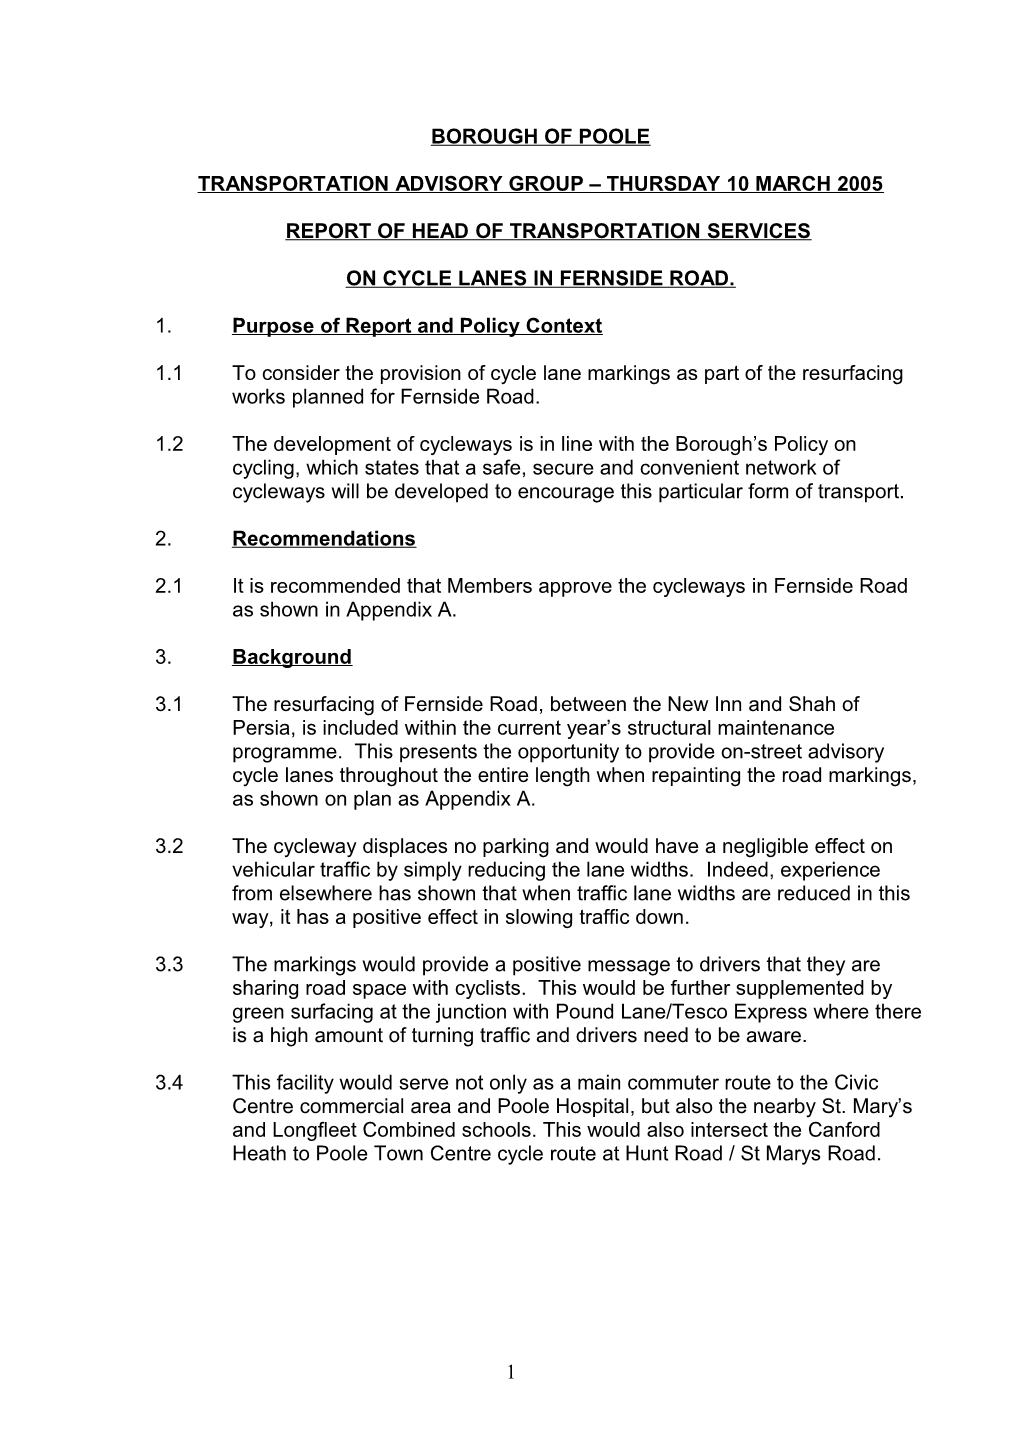 PFD - Councillor Parker - 10 March 2005 - Cycle Lanes in Fernside Road - Report